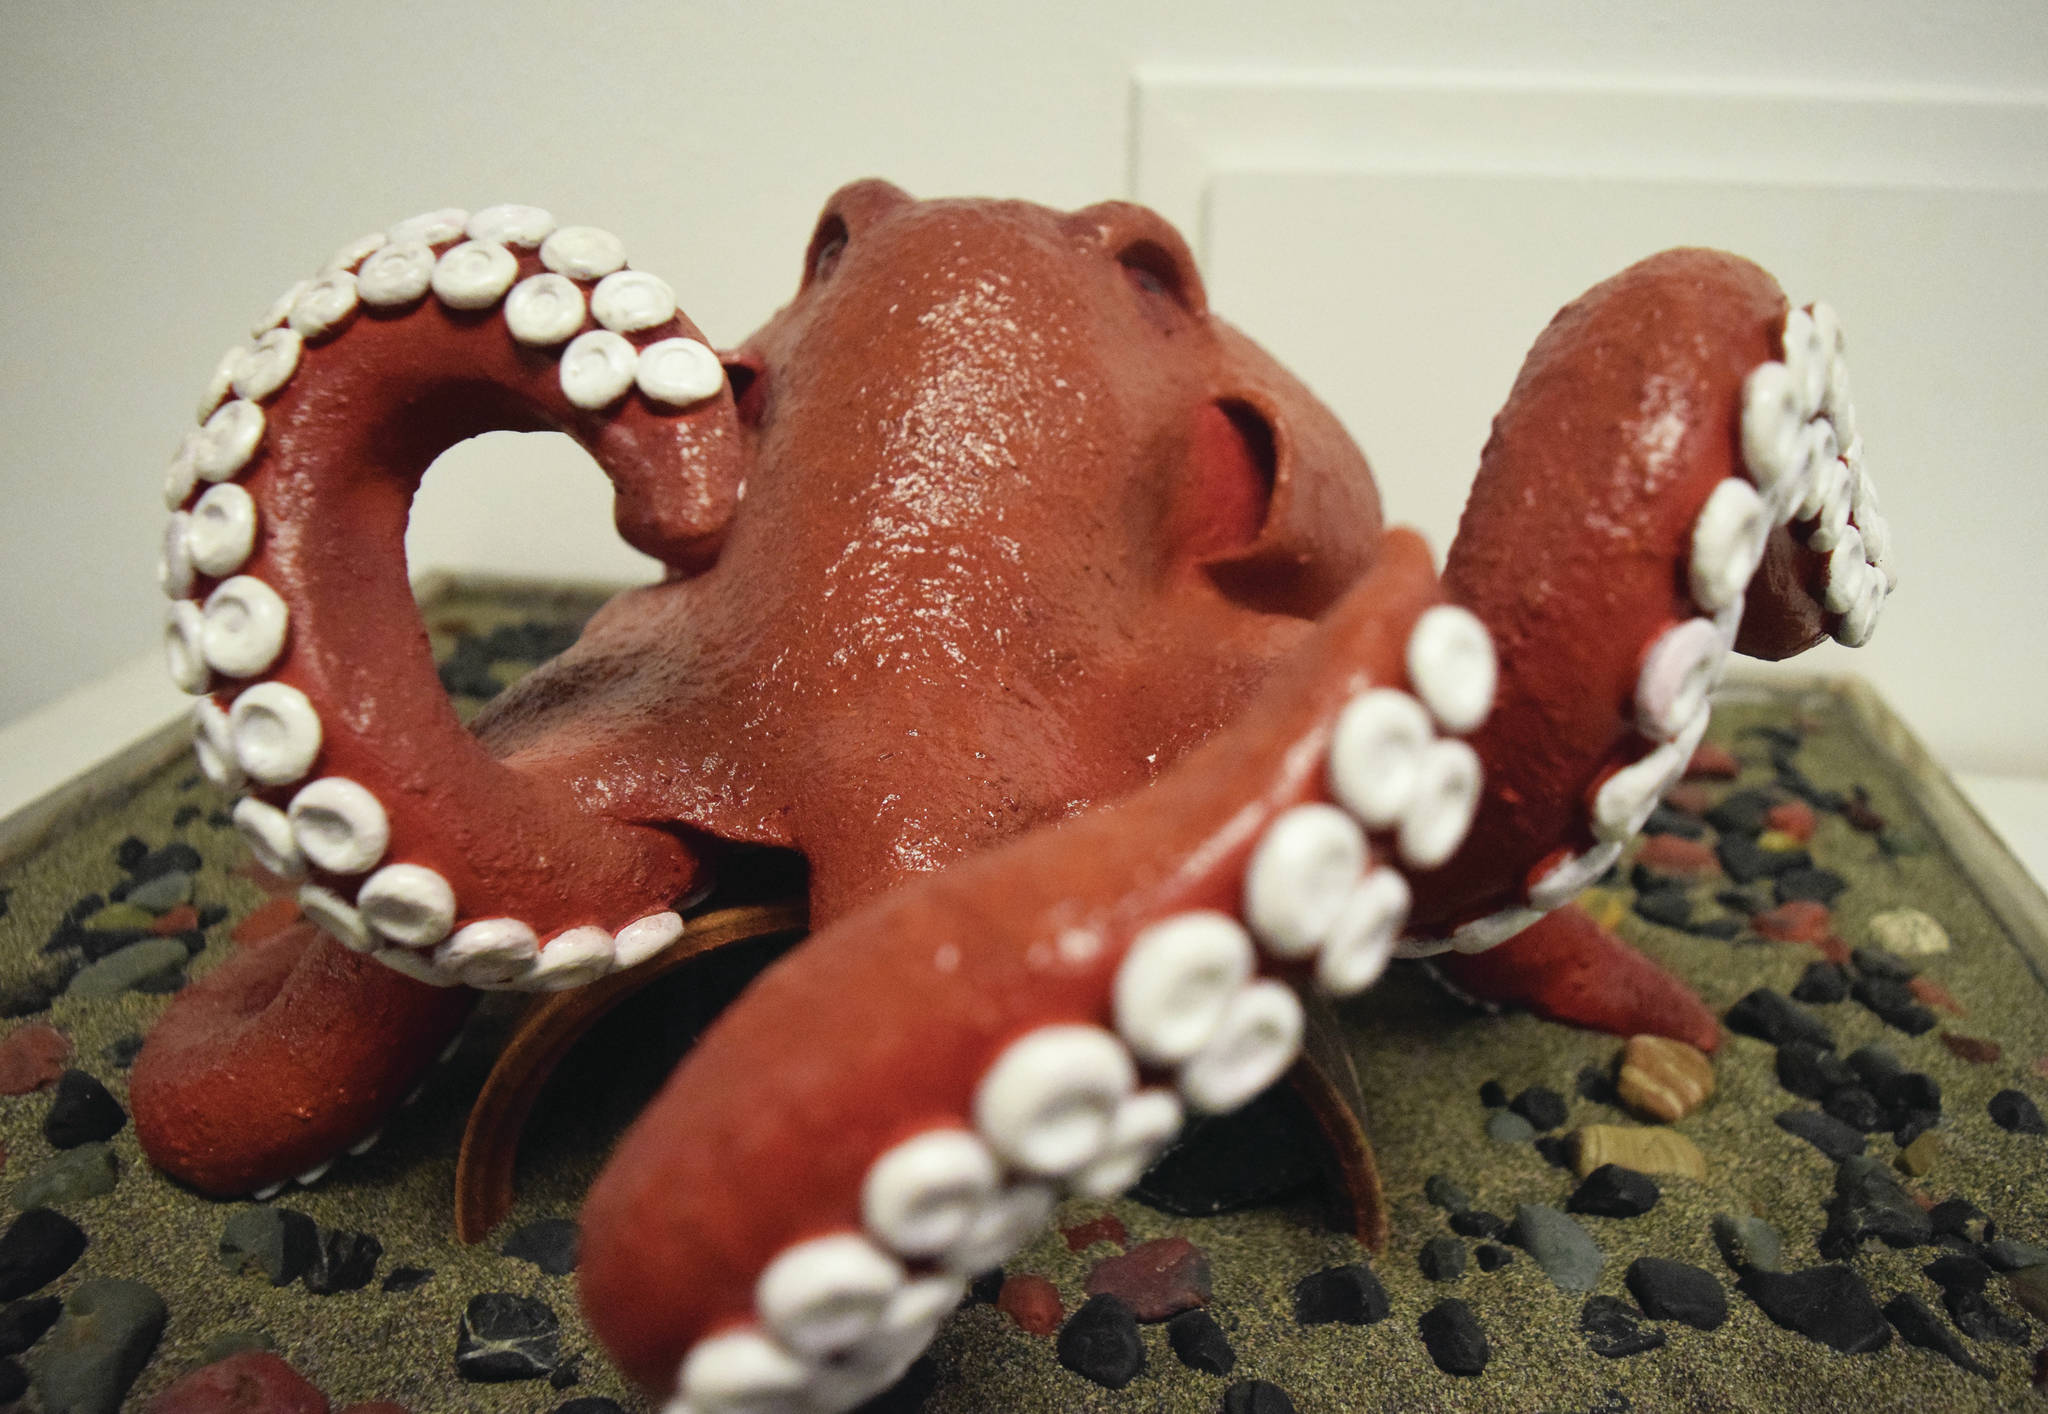 A clay sculpture by Bryan Olds sits on display at the “Clay on Display” exhibit.